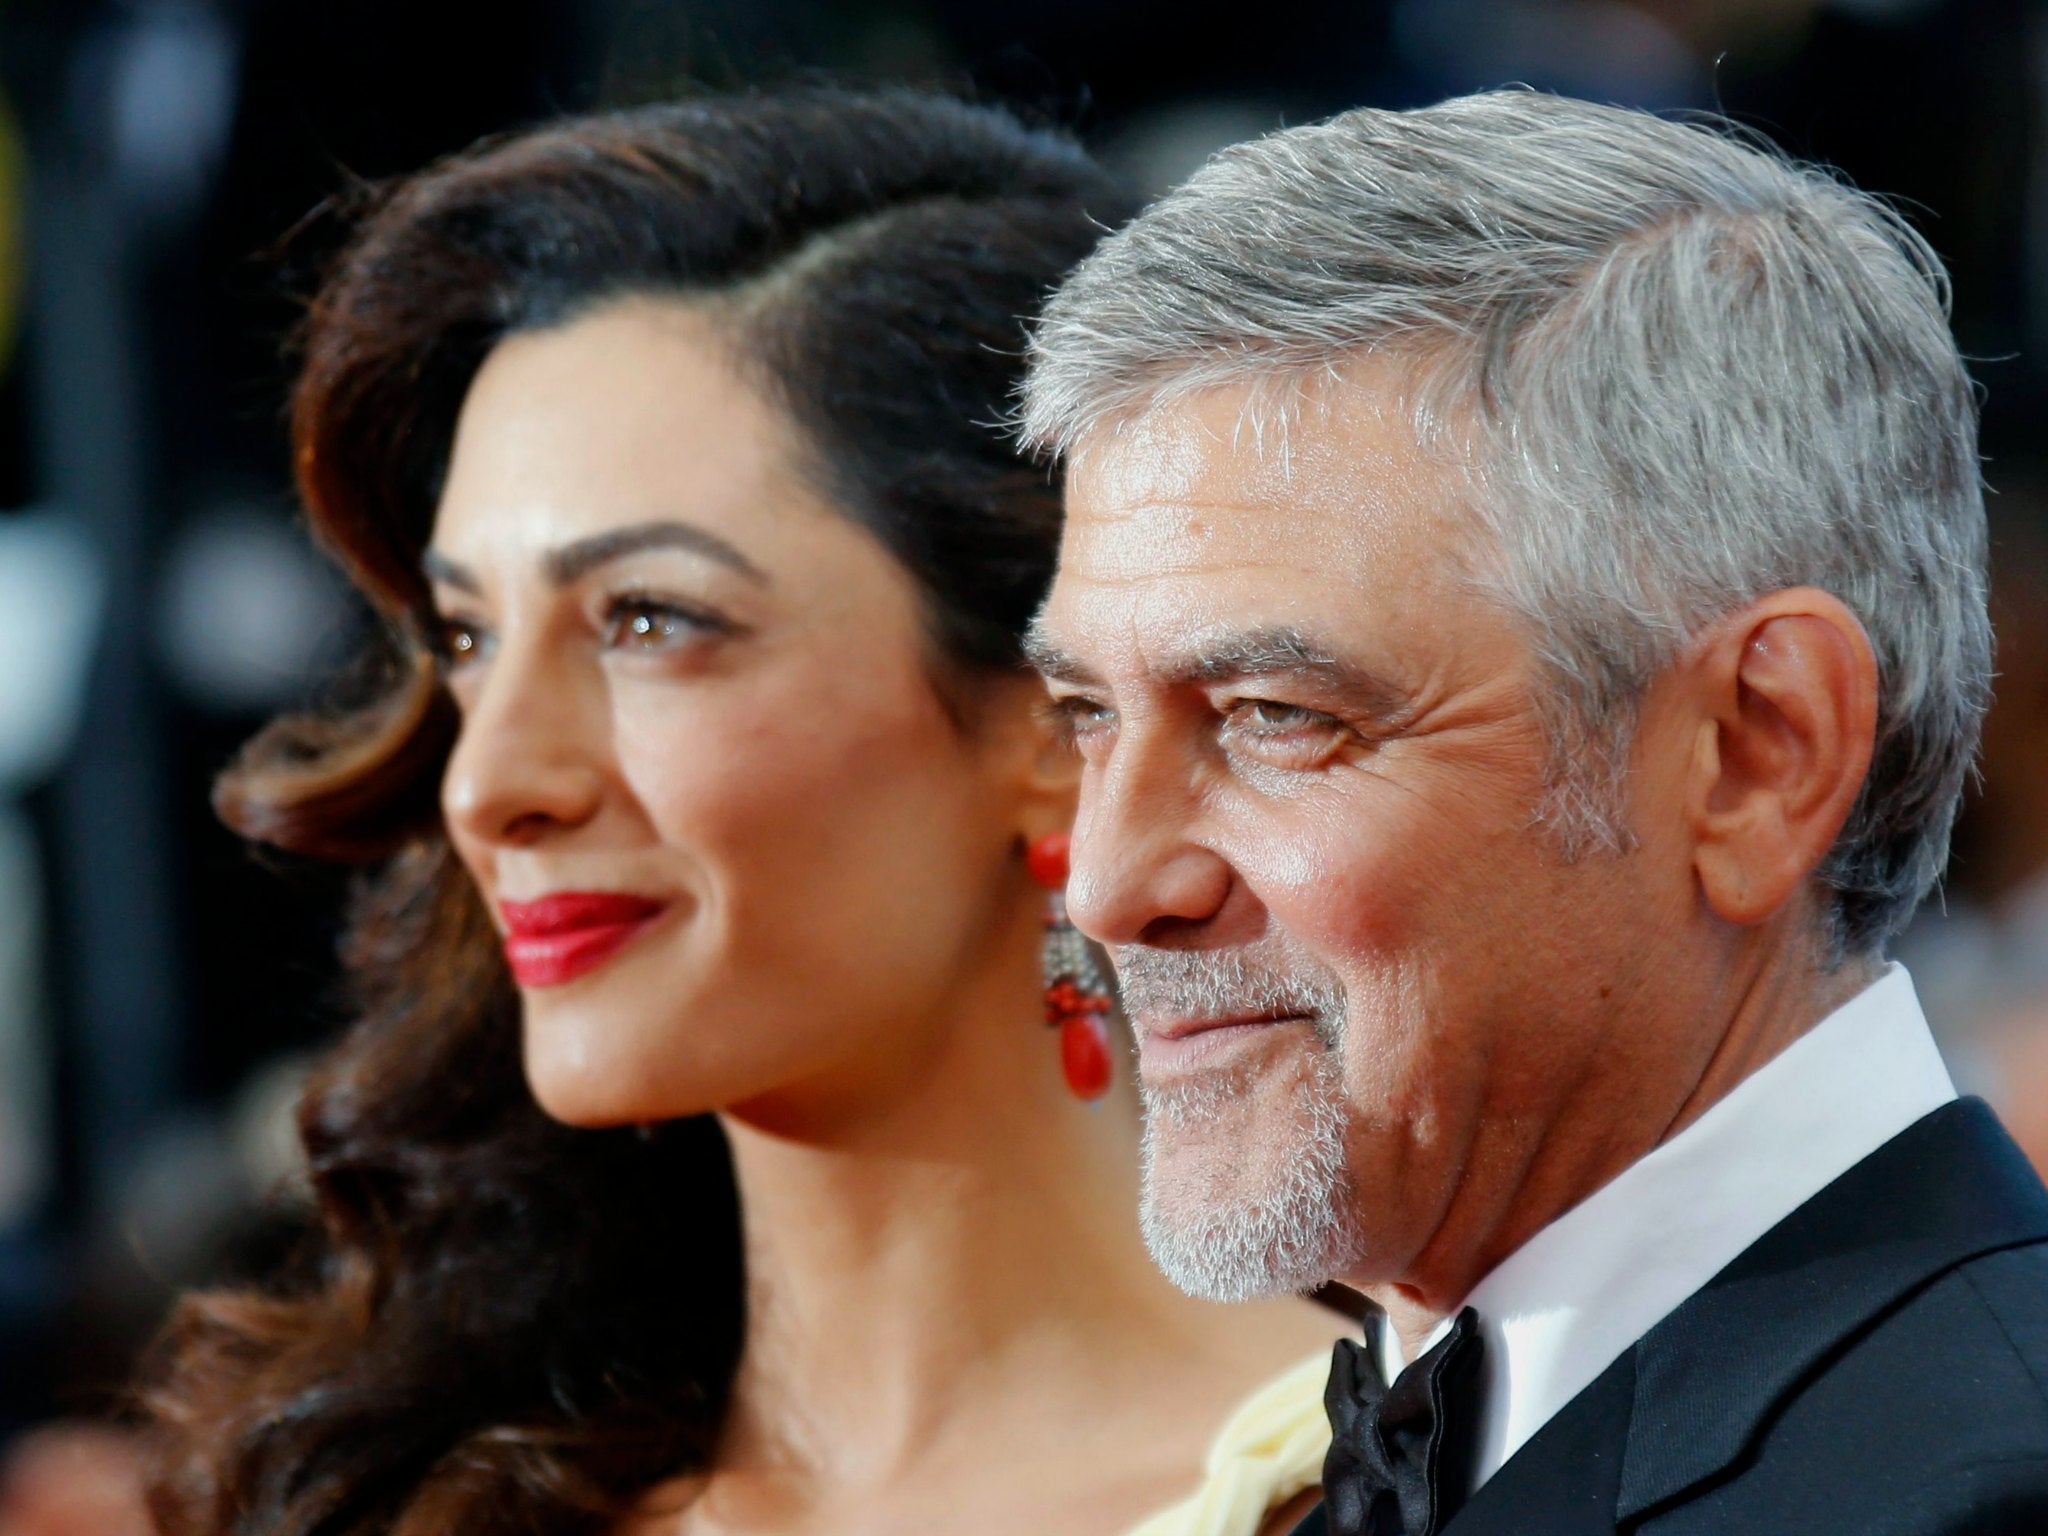 George and Amal Clooney, seen here at the Cannes film festival in May 2016, have pledged $1 million to the Southern Poverty Law Center